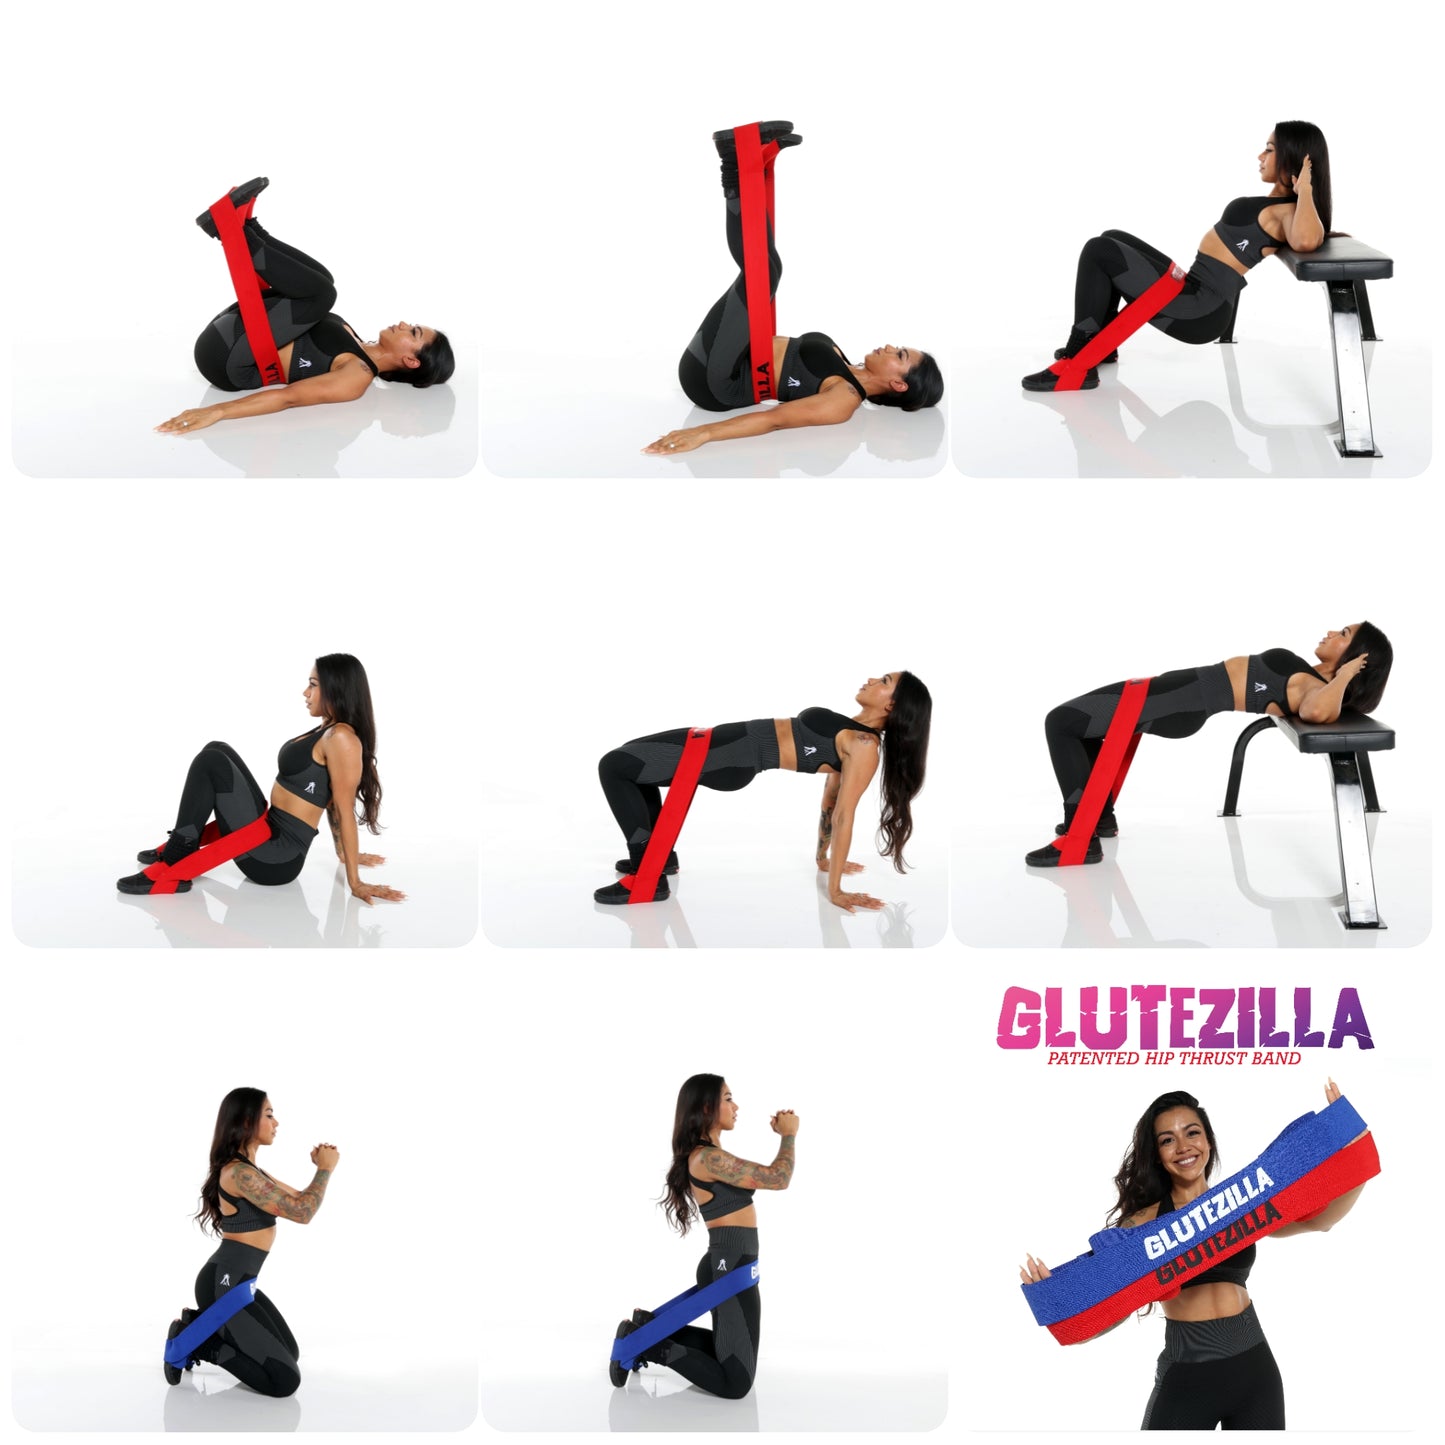 20 different workouts with glutezilla